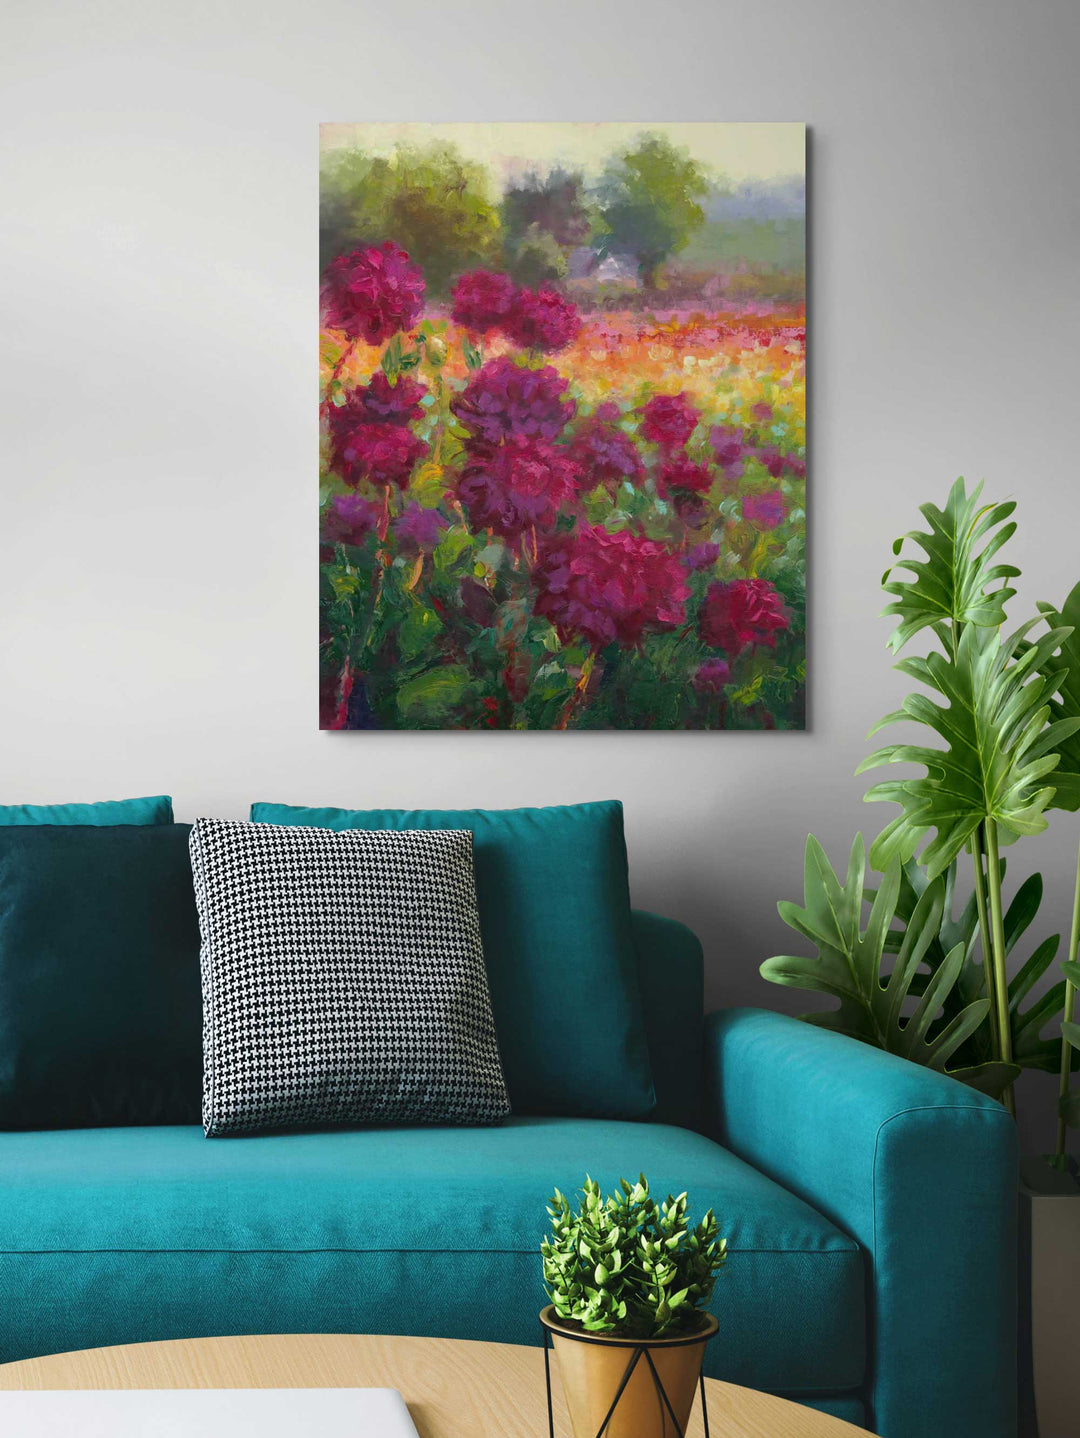 Boogie Nites, a large canvas wall art print of an impressionist oil painting landscape of Swan Island Dahlias hangs on a wall in a living room behind behind a teal sofa couch.